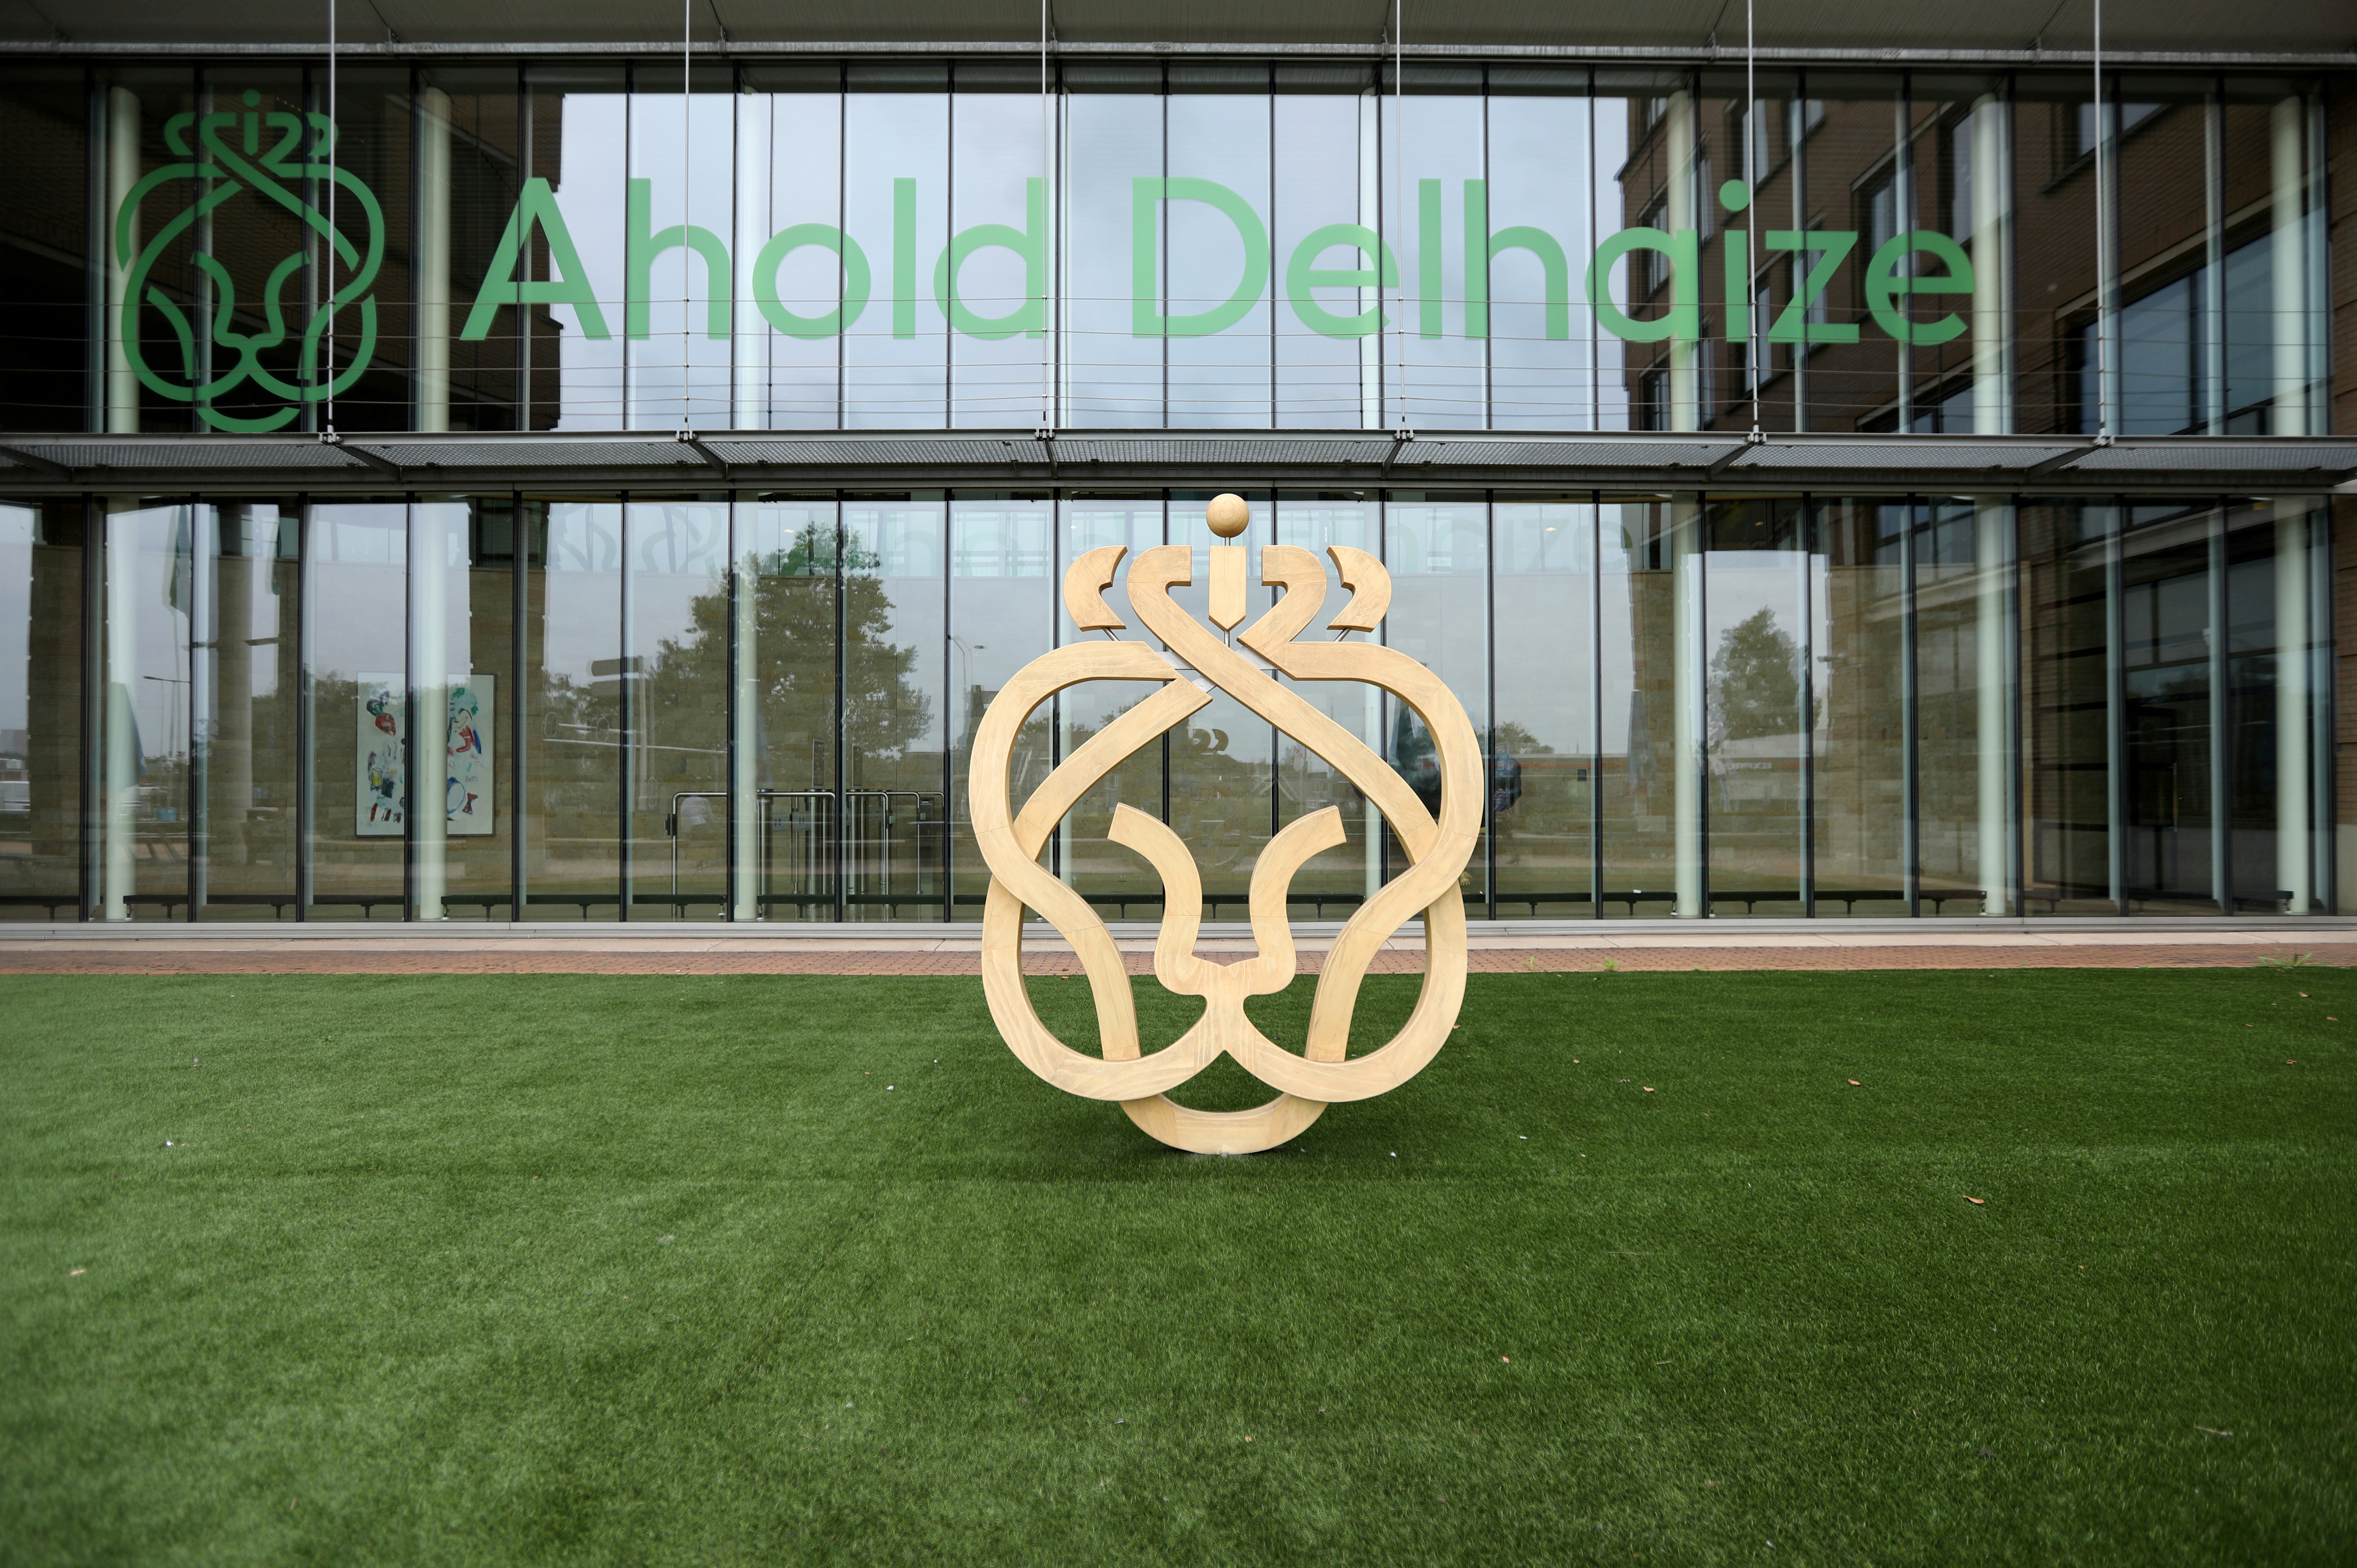 The Ahold Delhaize logo is seen at the company's headquarters in Zaandam